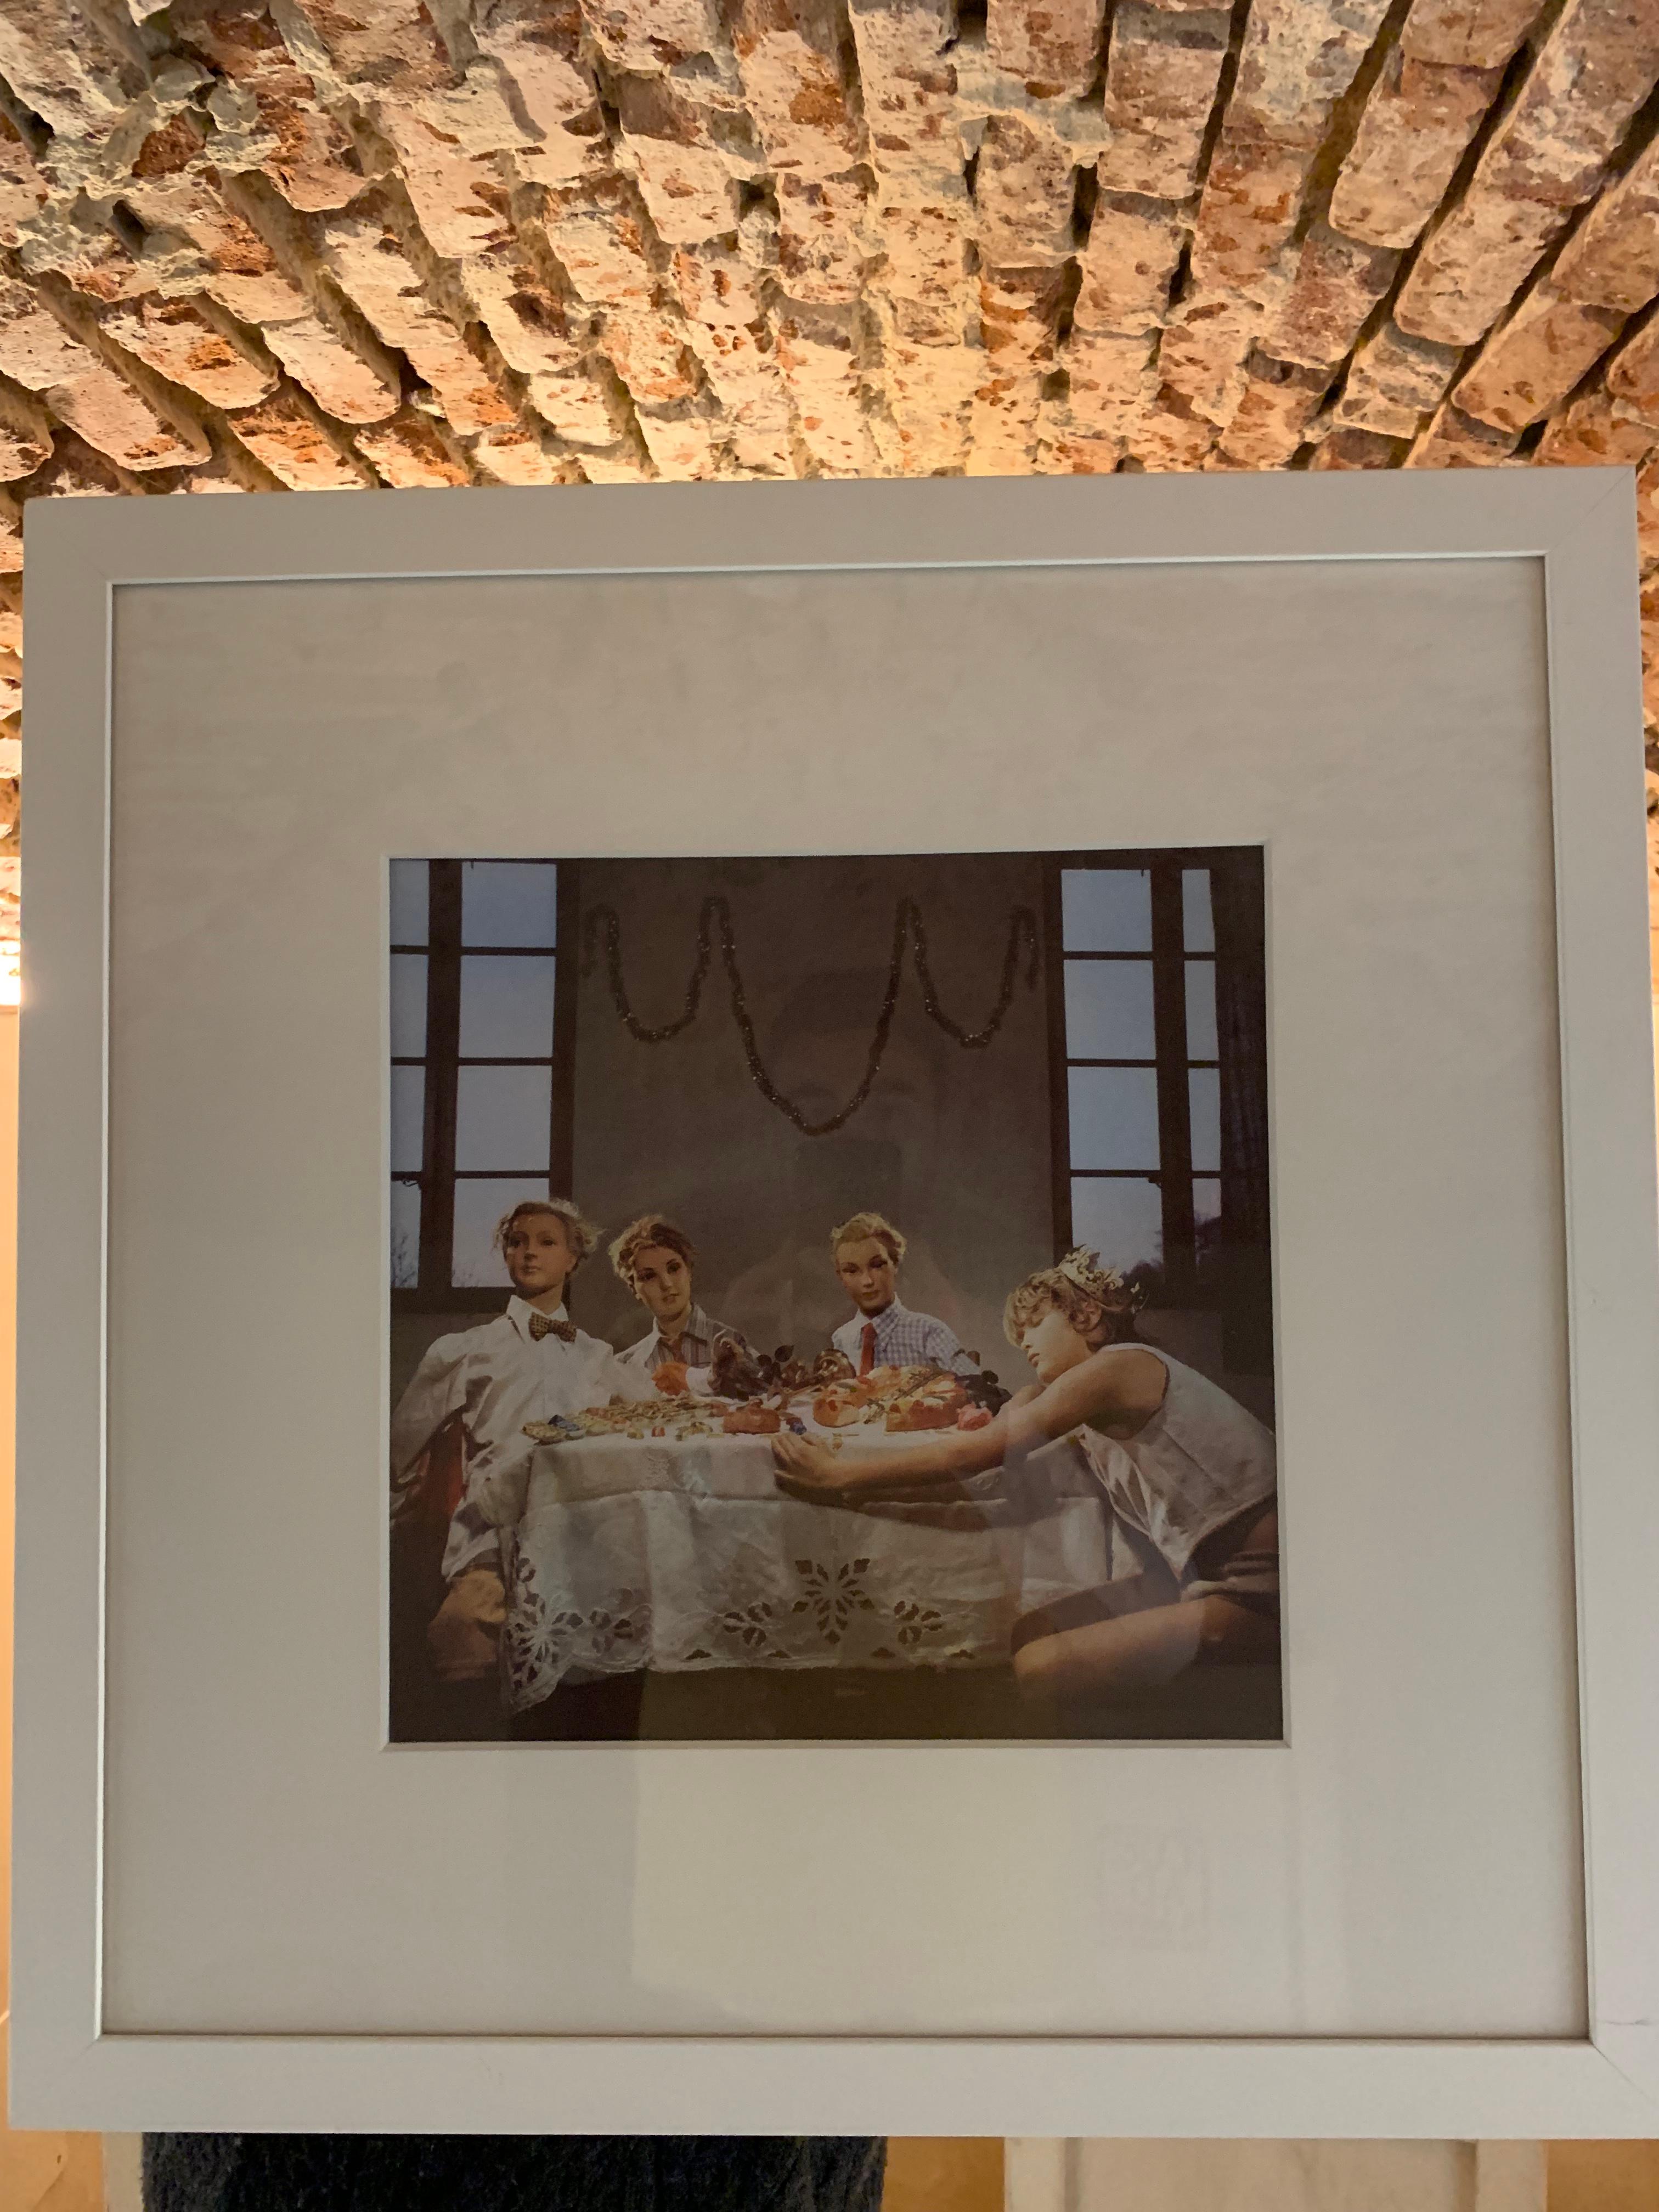 'That Summer' Series

Comes mounted in a frame which measures 55x55cm
Number 15 of an edition of 40.

Born in 1950 in Provence.

Bernard Faucon was one of the first photographers in the second half of the 20th century to systematically create and